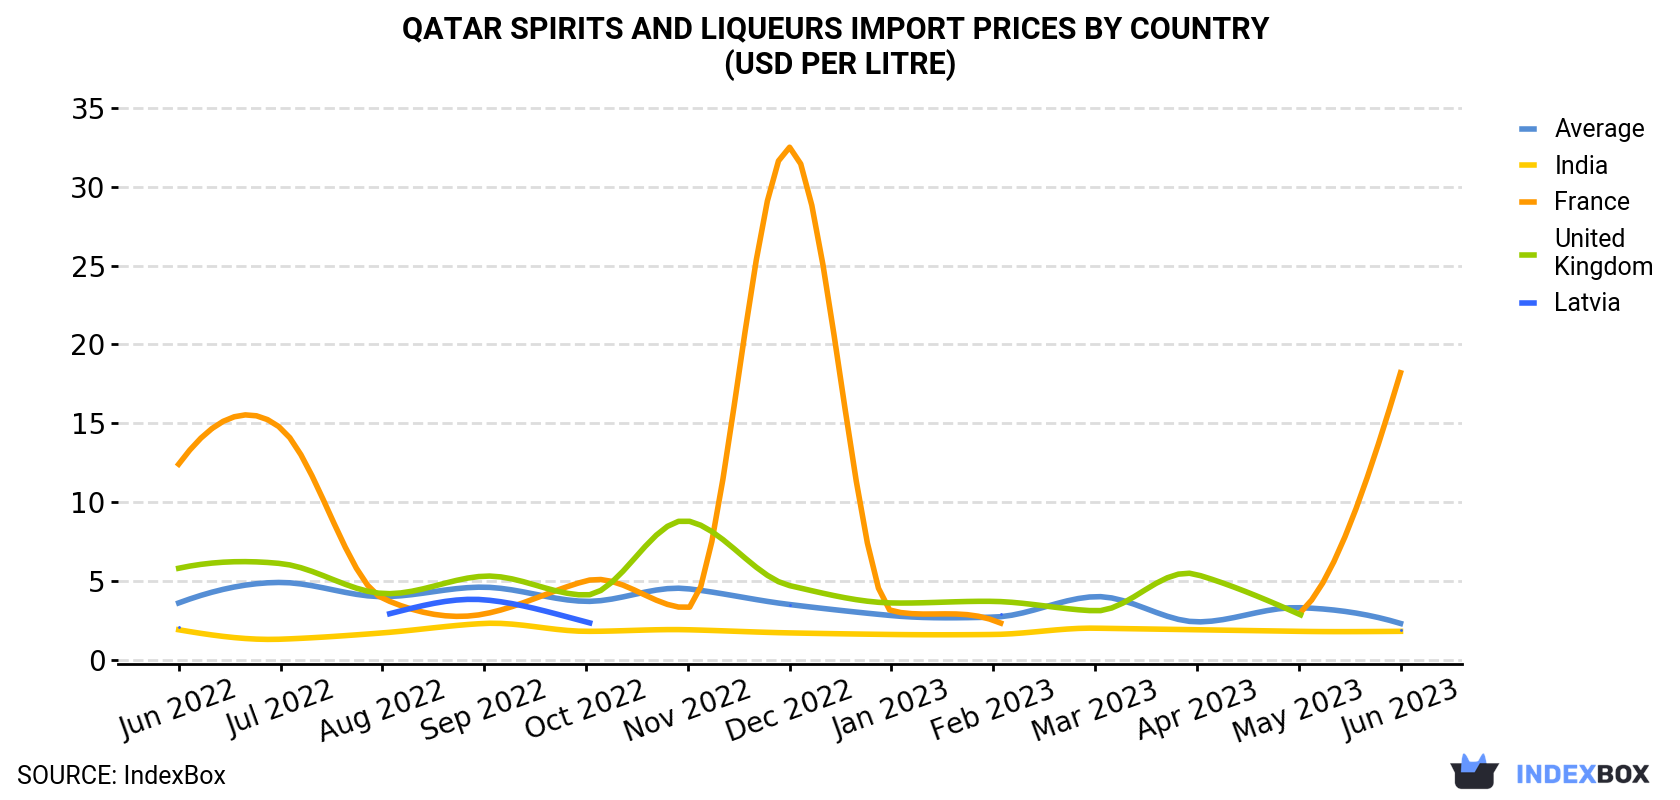 Qatar Spirits And Liqueurs Import Prices By Country (USD Per Litre)